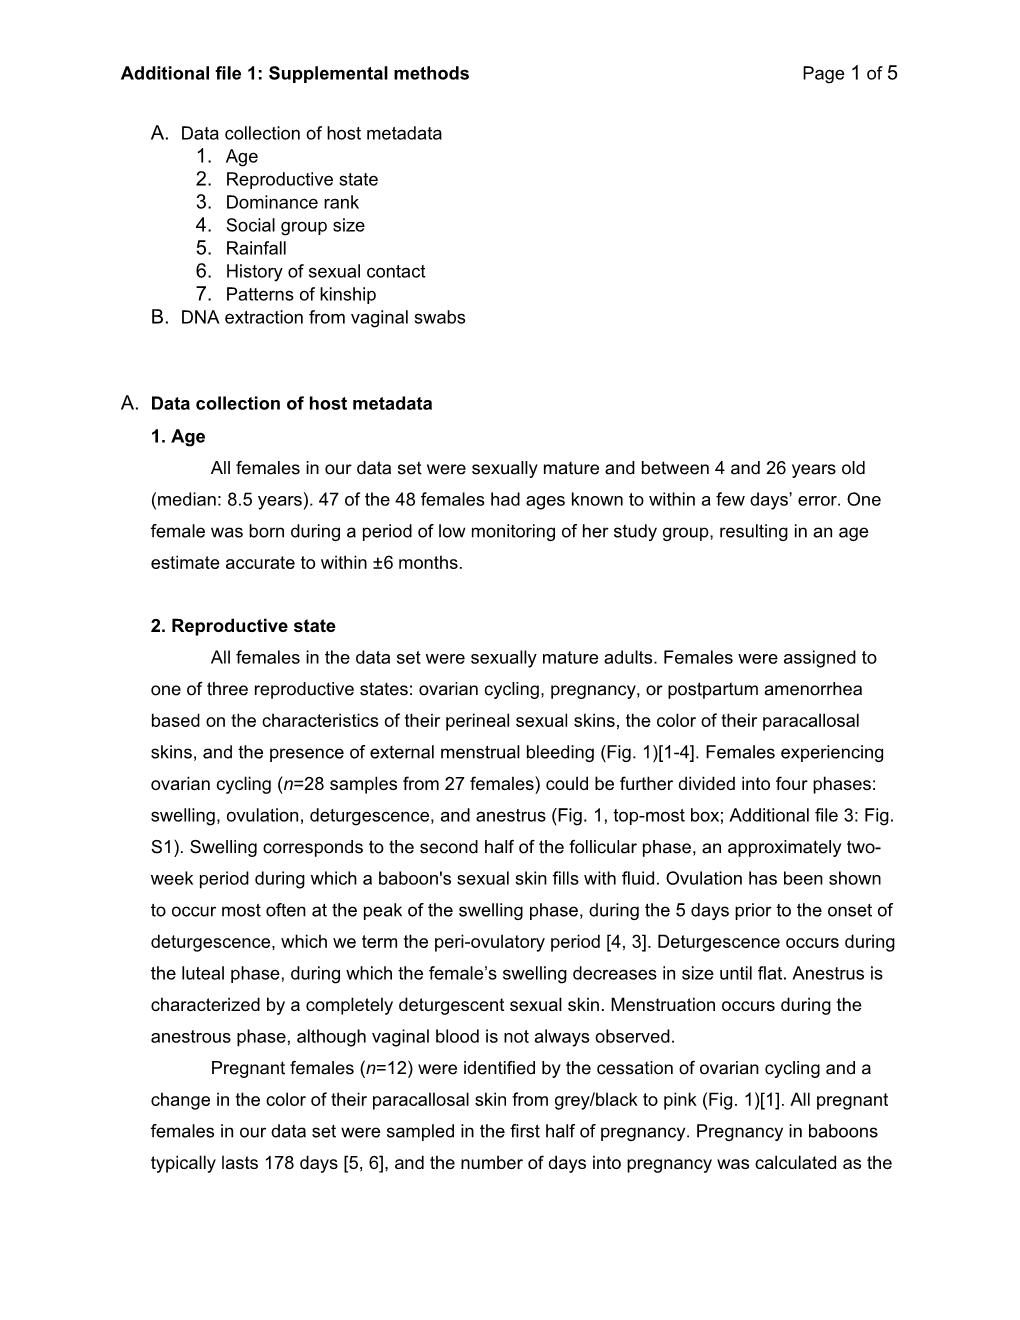 Additional File 1: Supplemental Methods Page 1 of 1